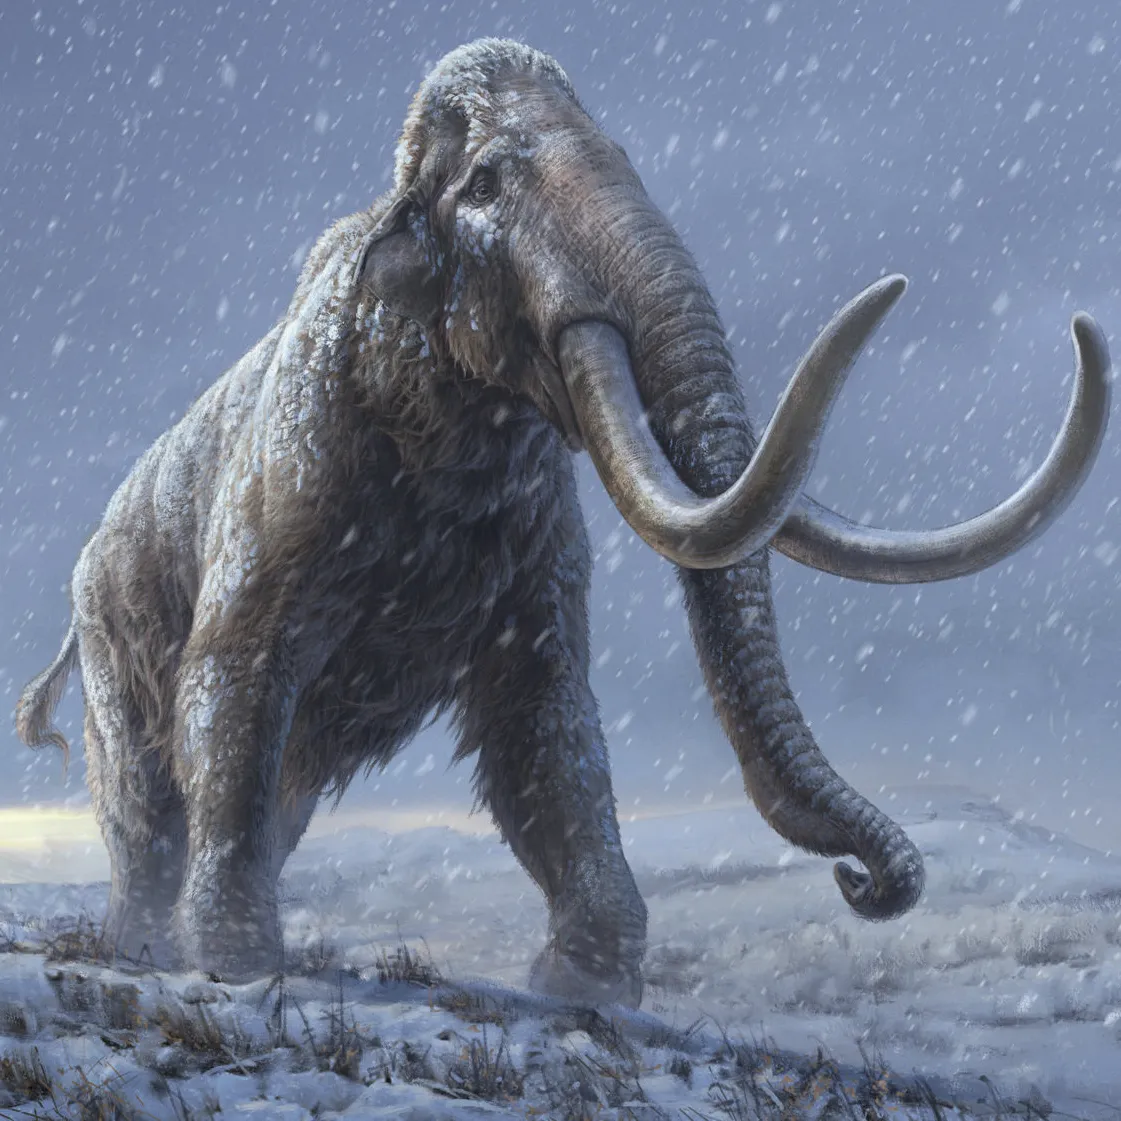 Scientists predict that in only a few years, there is a possibility woolly mammoths will be among us again!